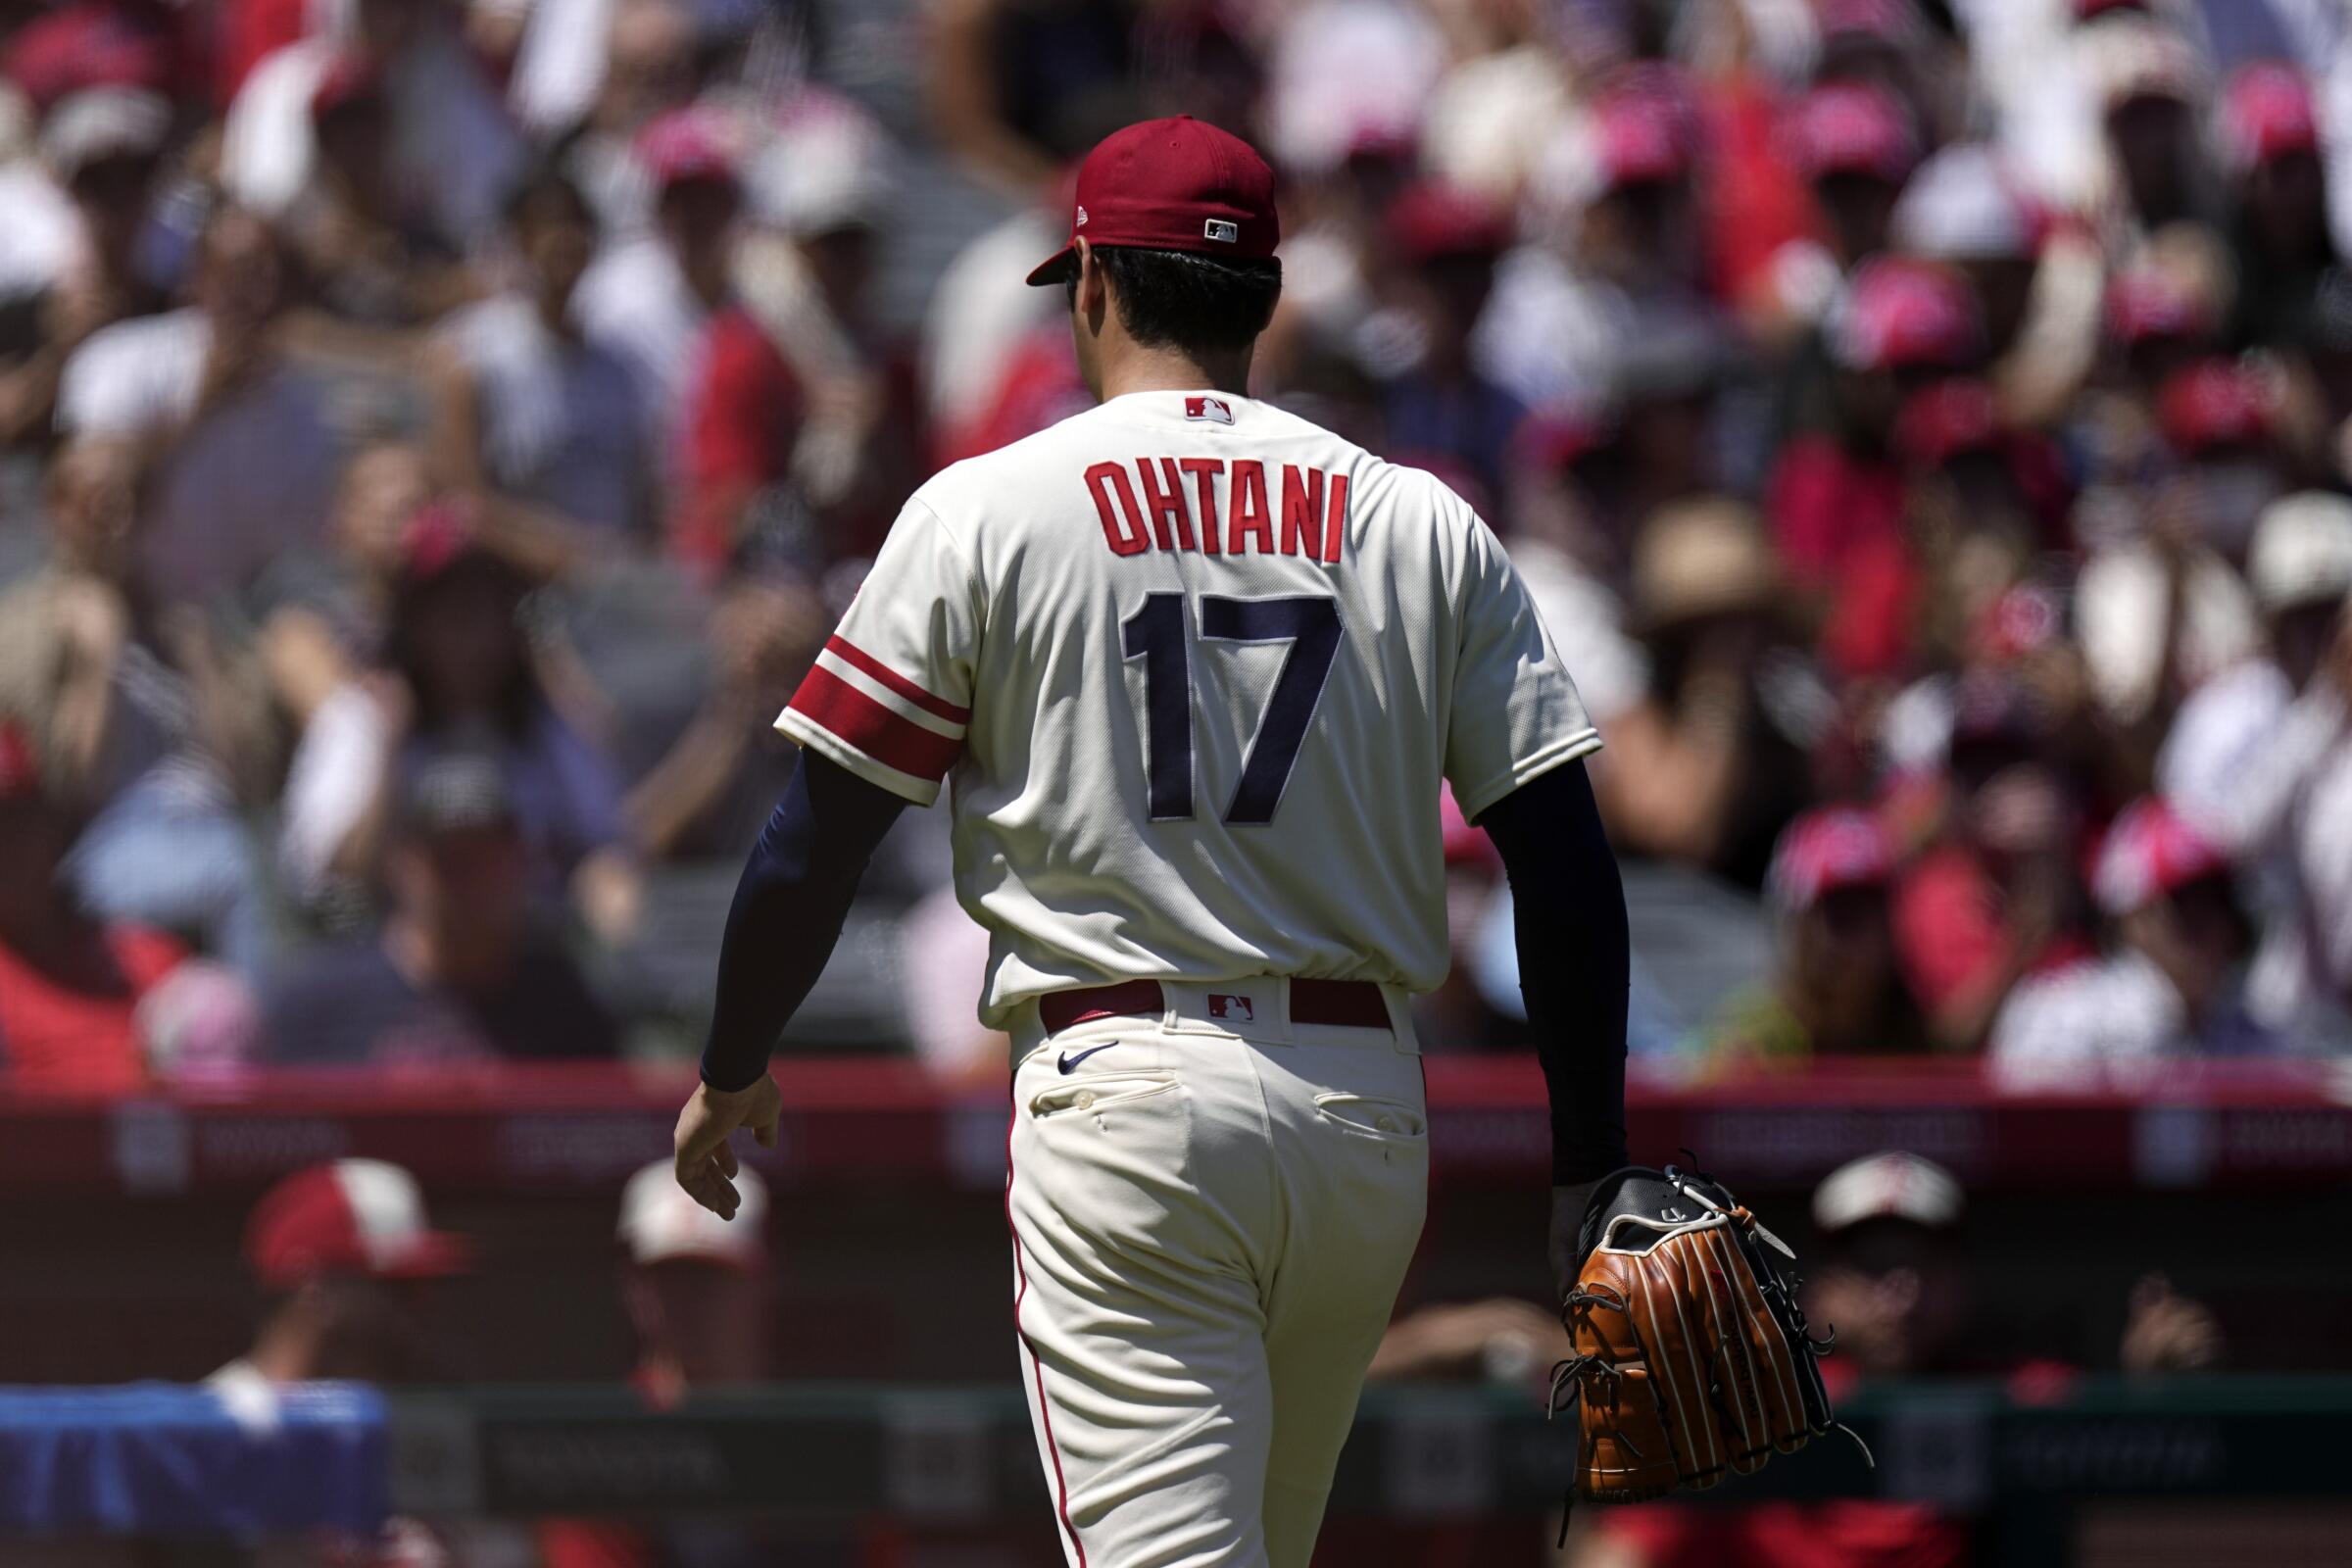 Ohtani has torn UCL in pitching elbow, Trout heads back to IL